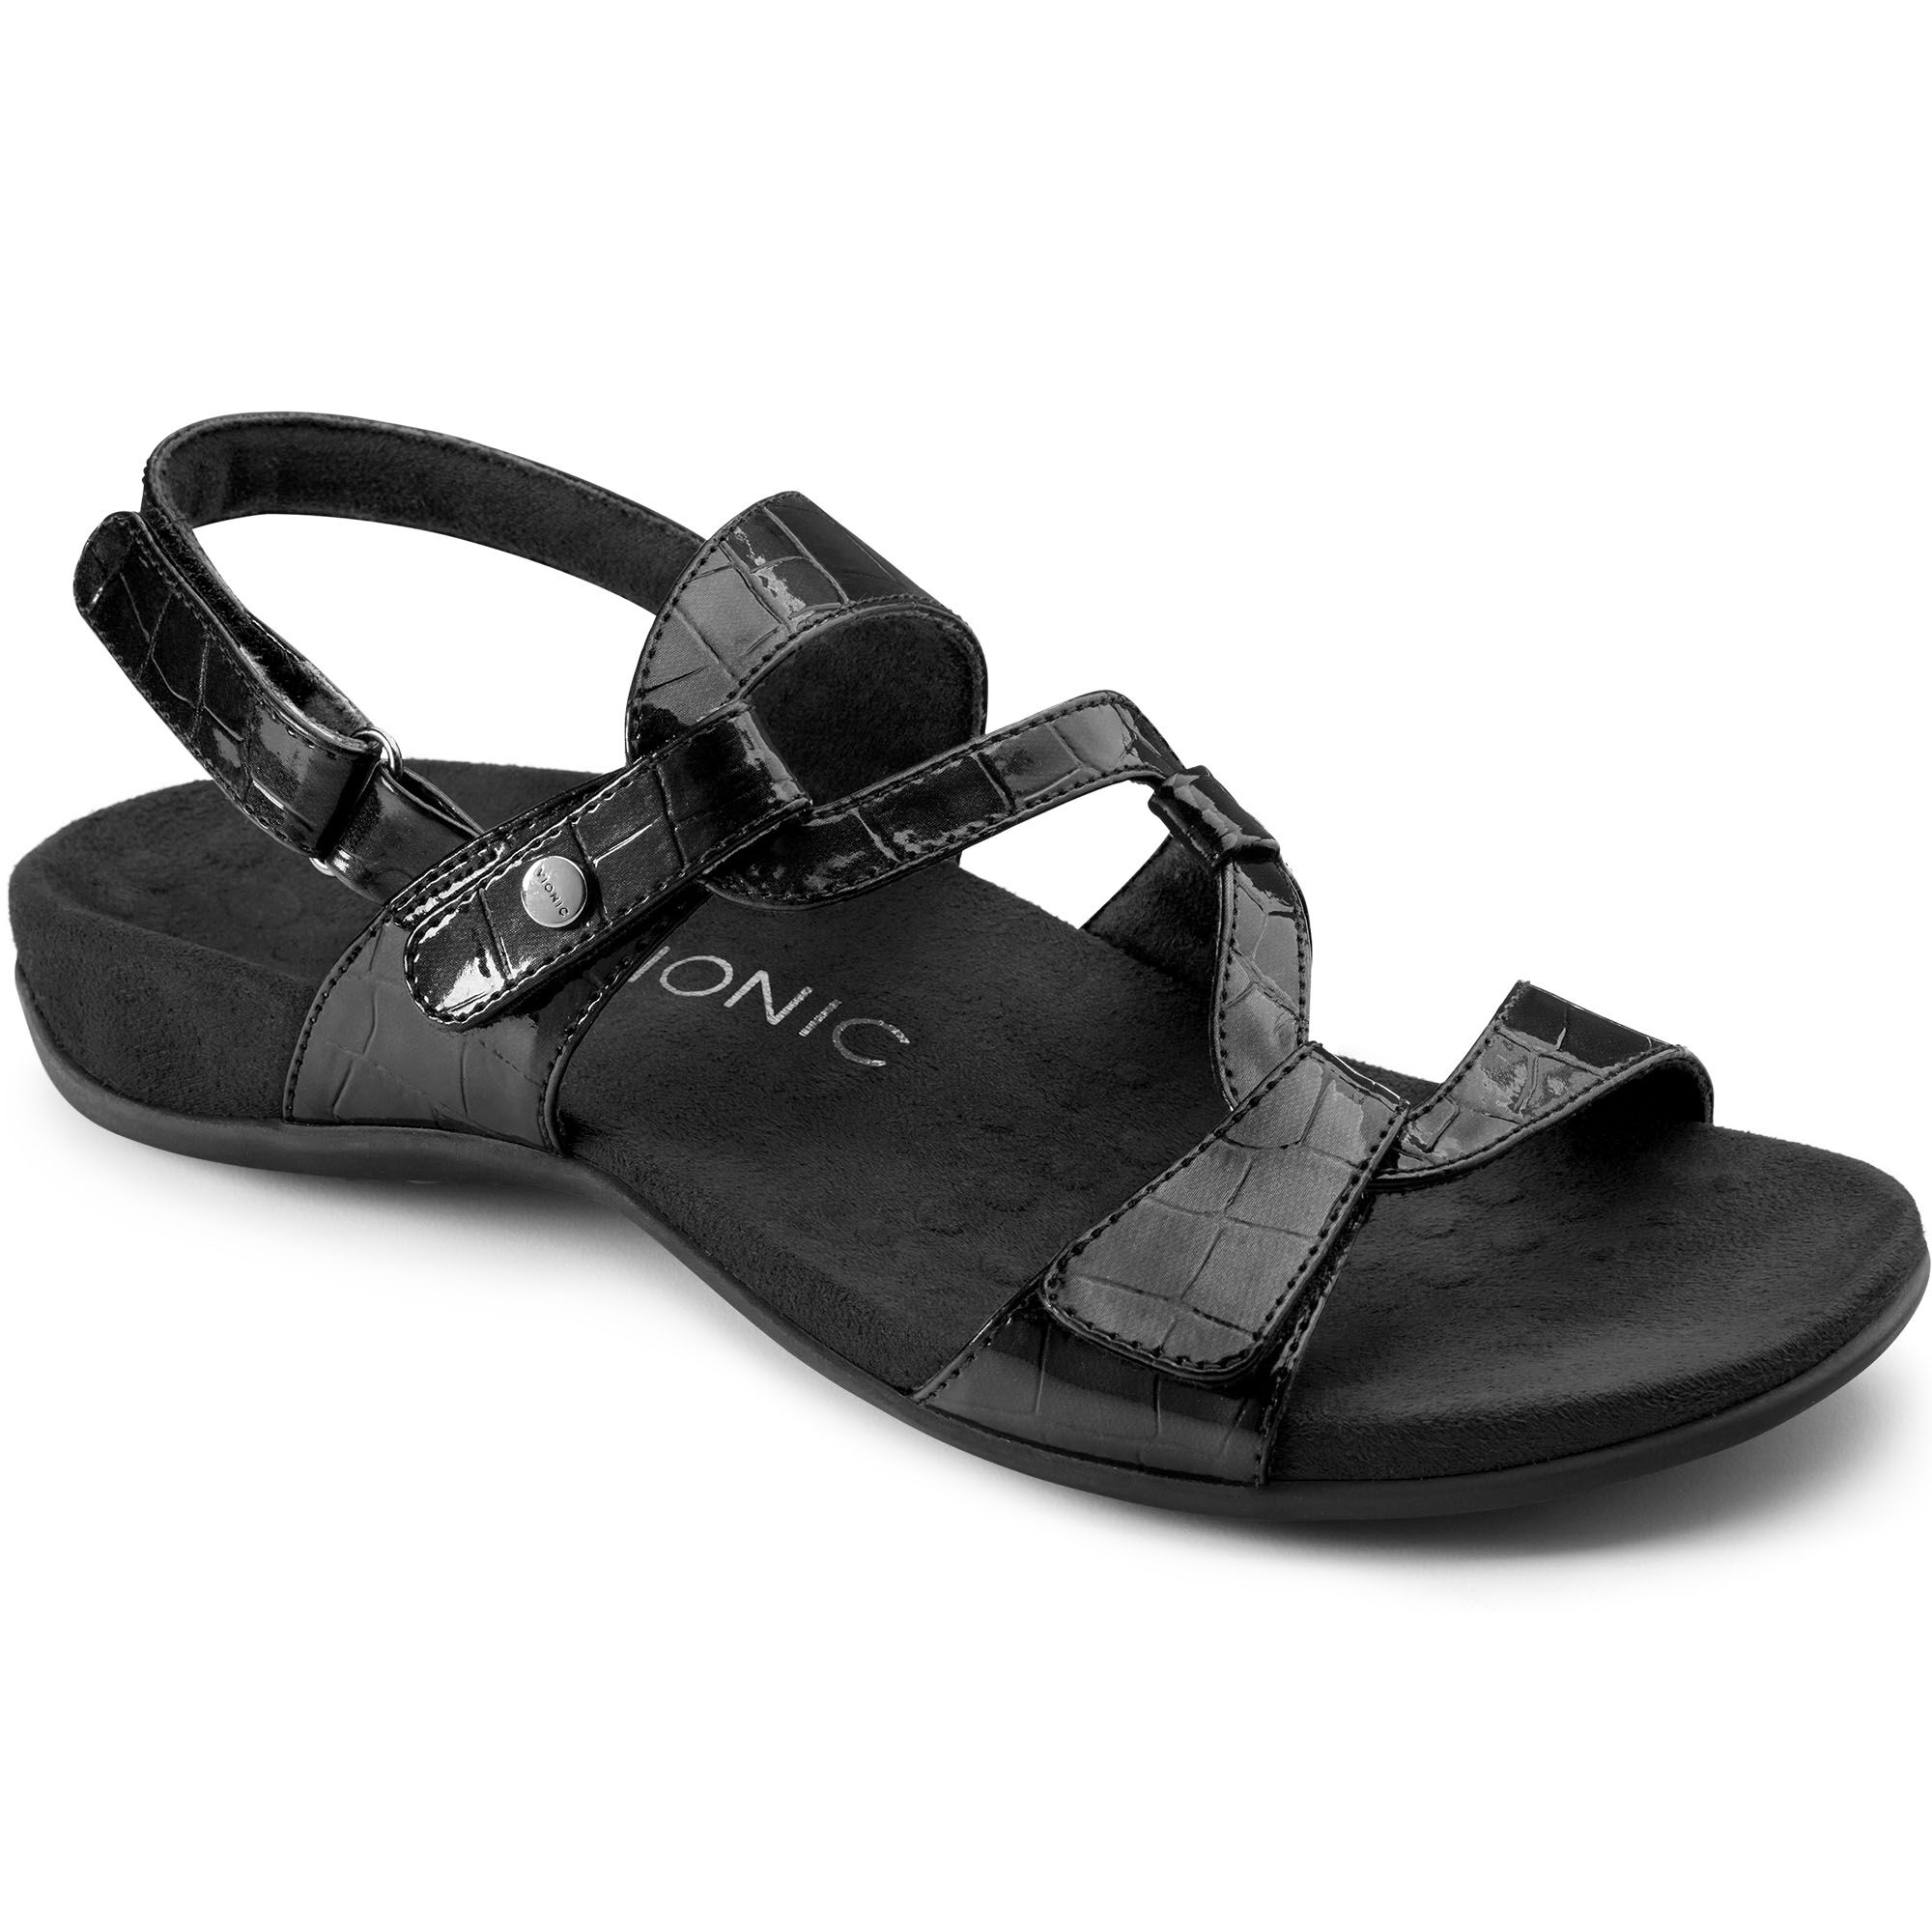 vionic sandals with backstrap